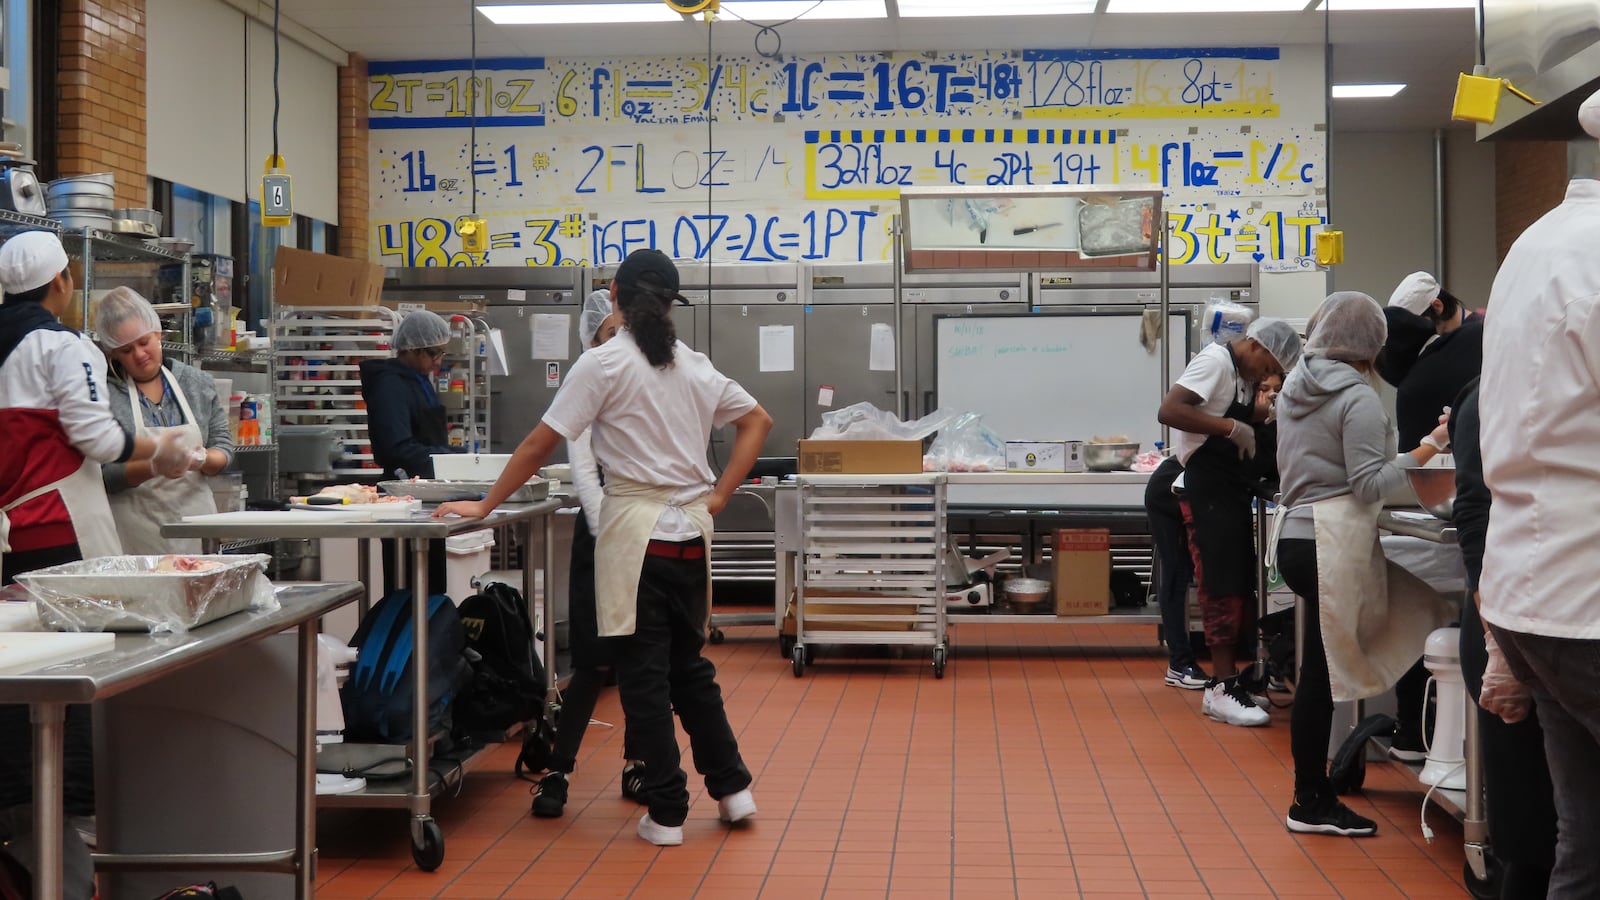 A culinary course at Theodore Roosevelt High School in Albany Park